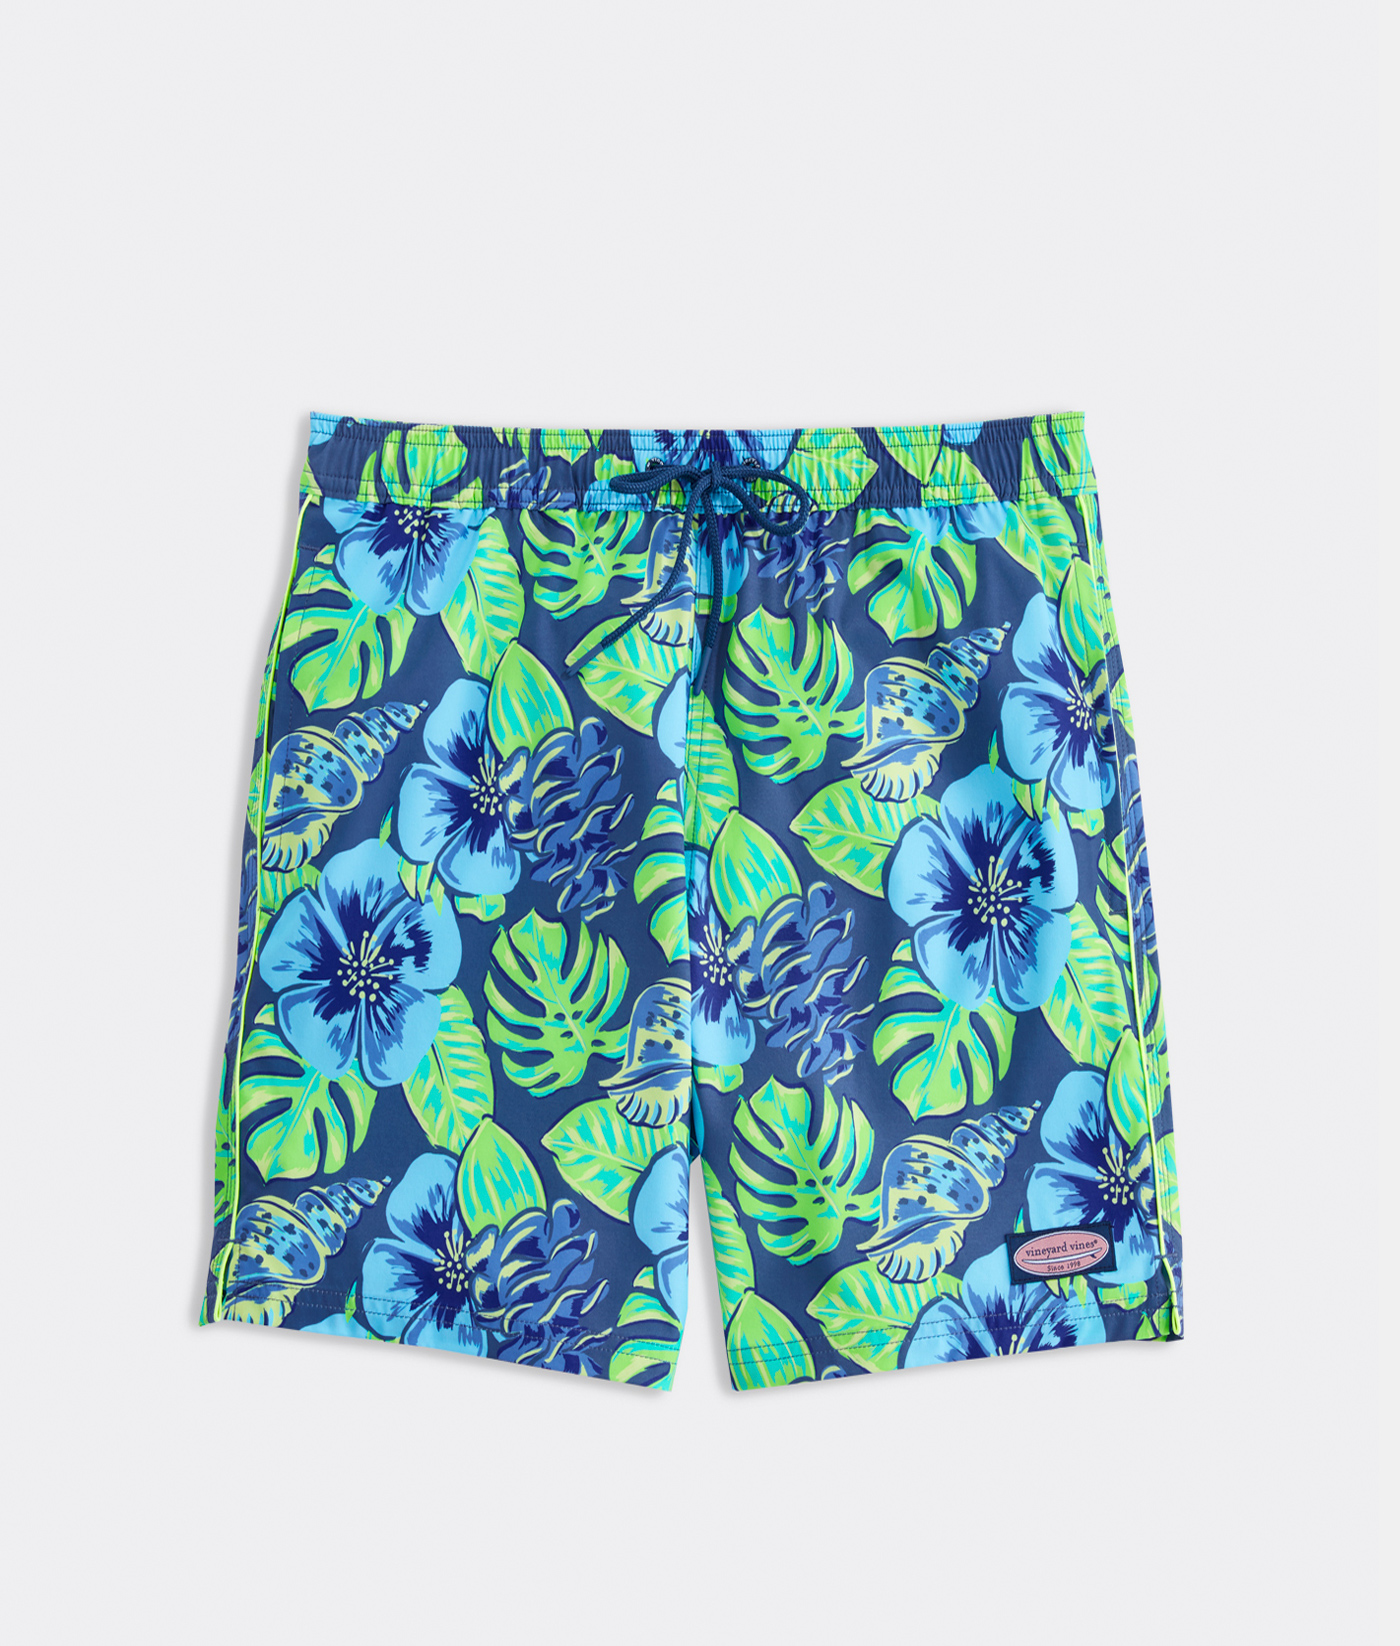 Shop 7 Inch Printed Piped Chappy Trunks at vineyard vines